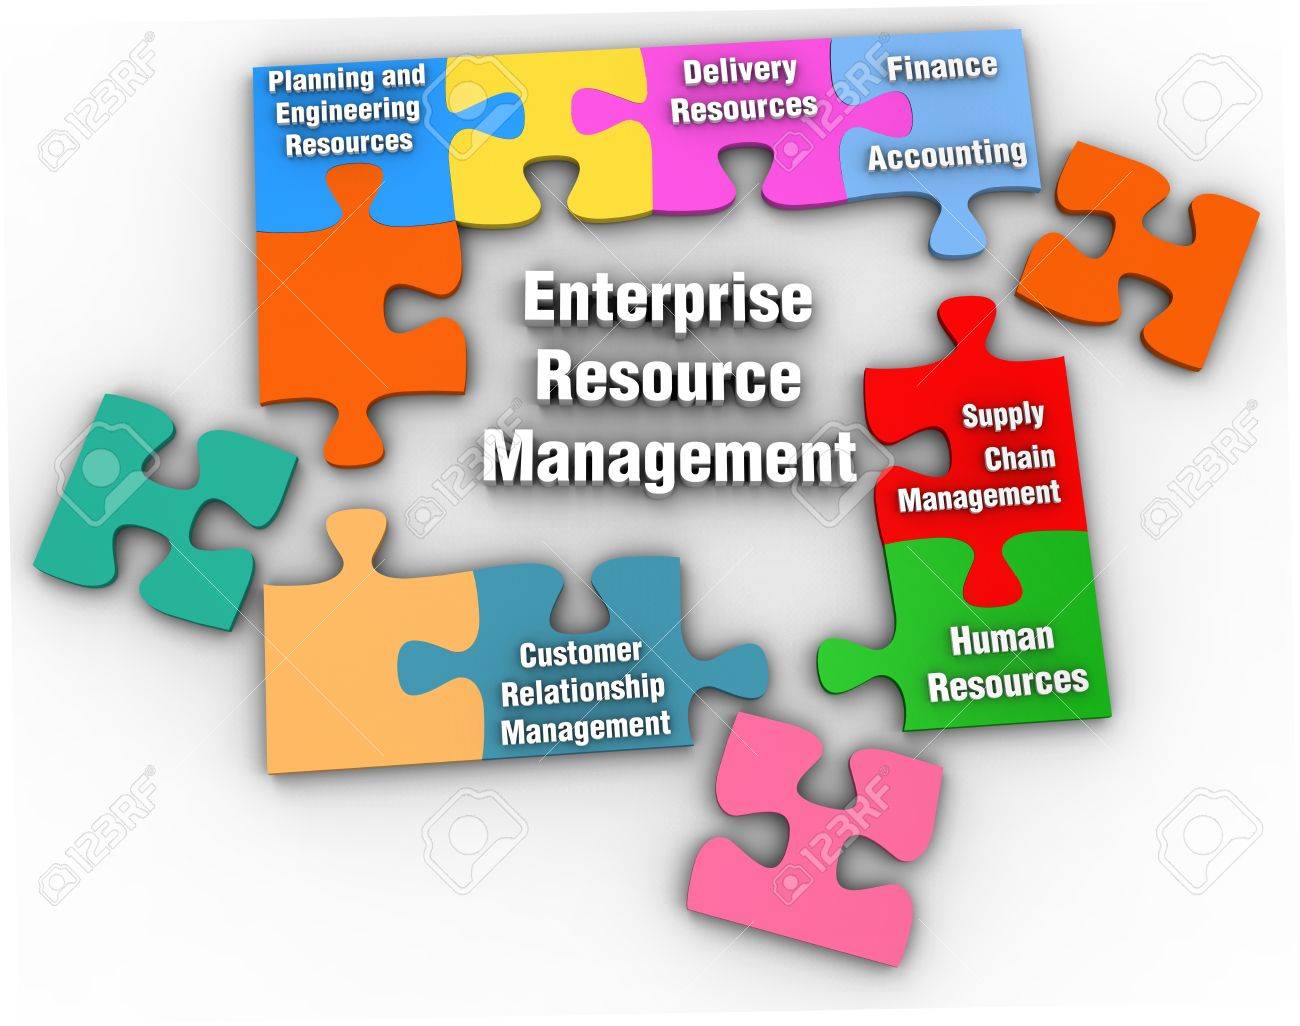 Positivity and potential aspects of ERP software solution